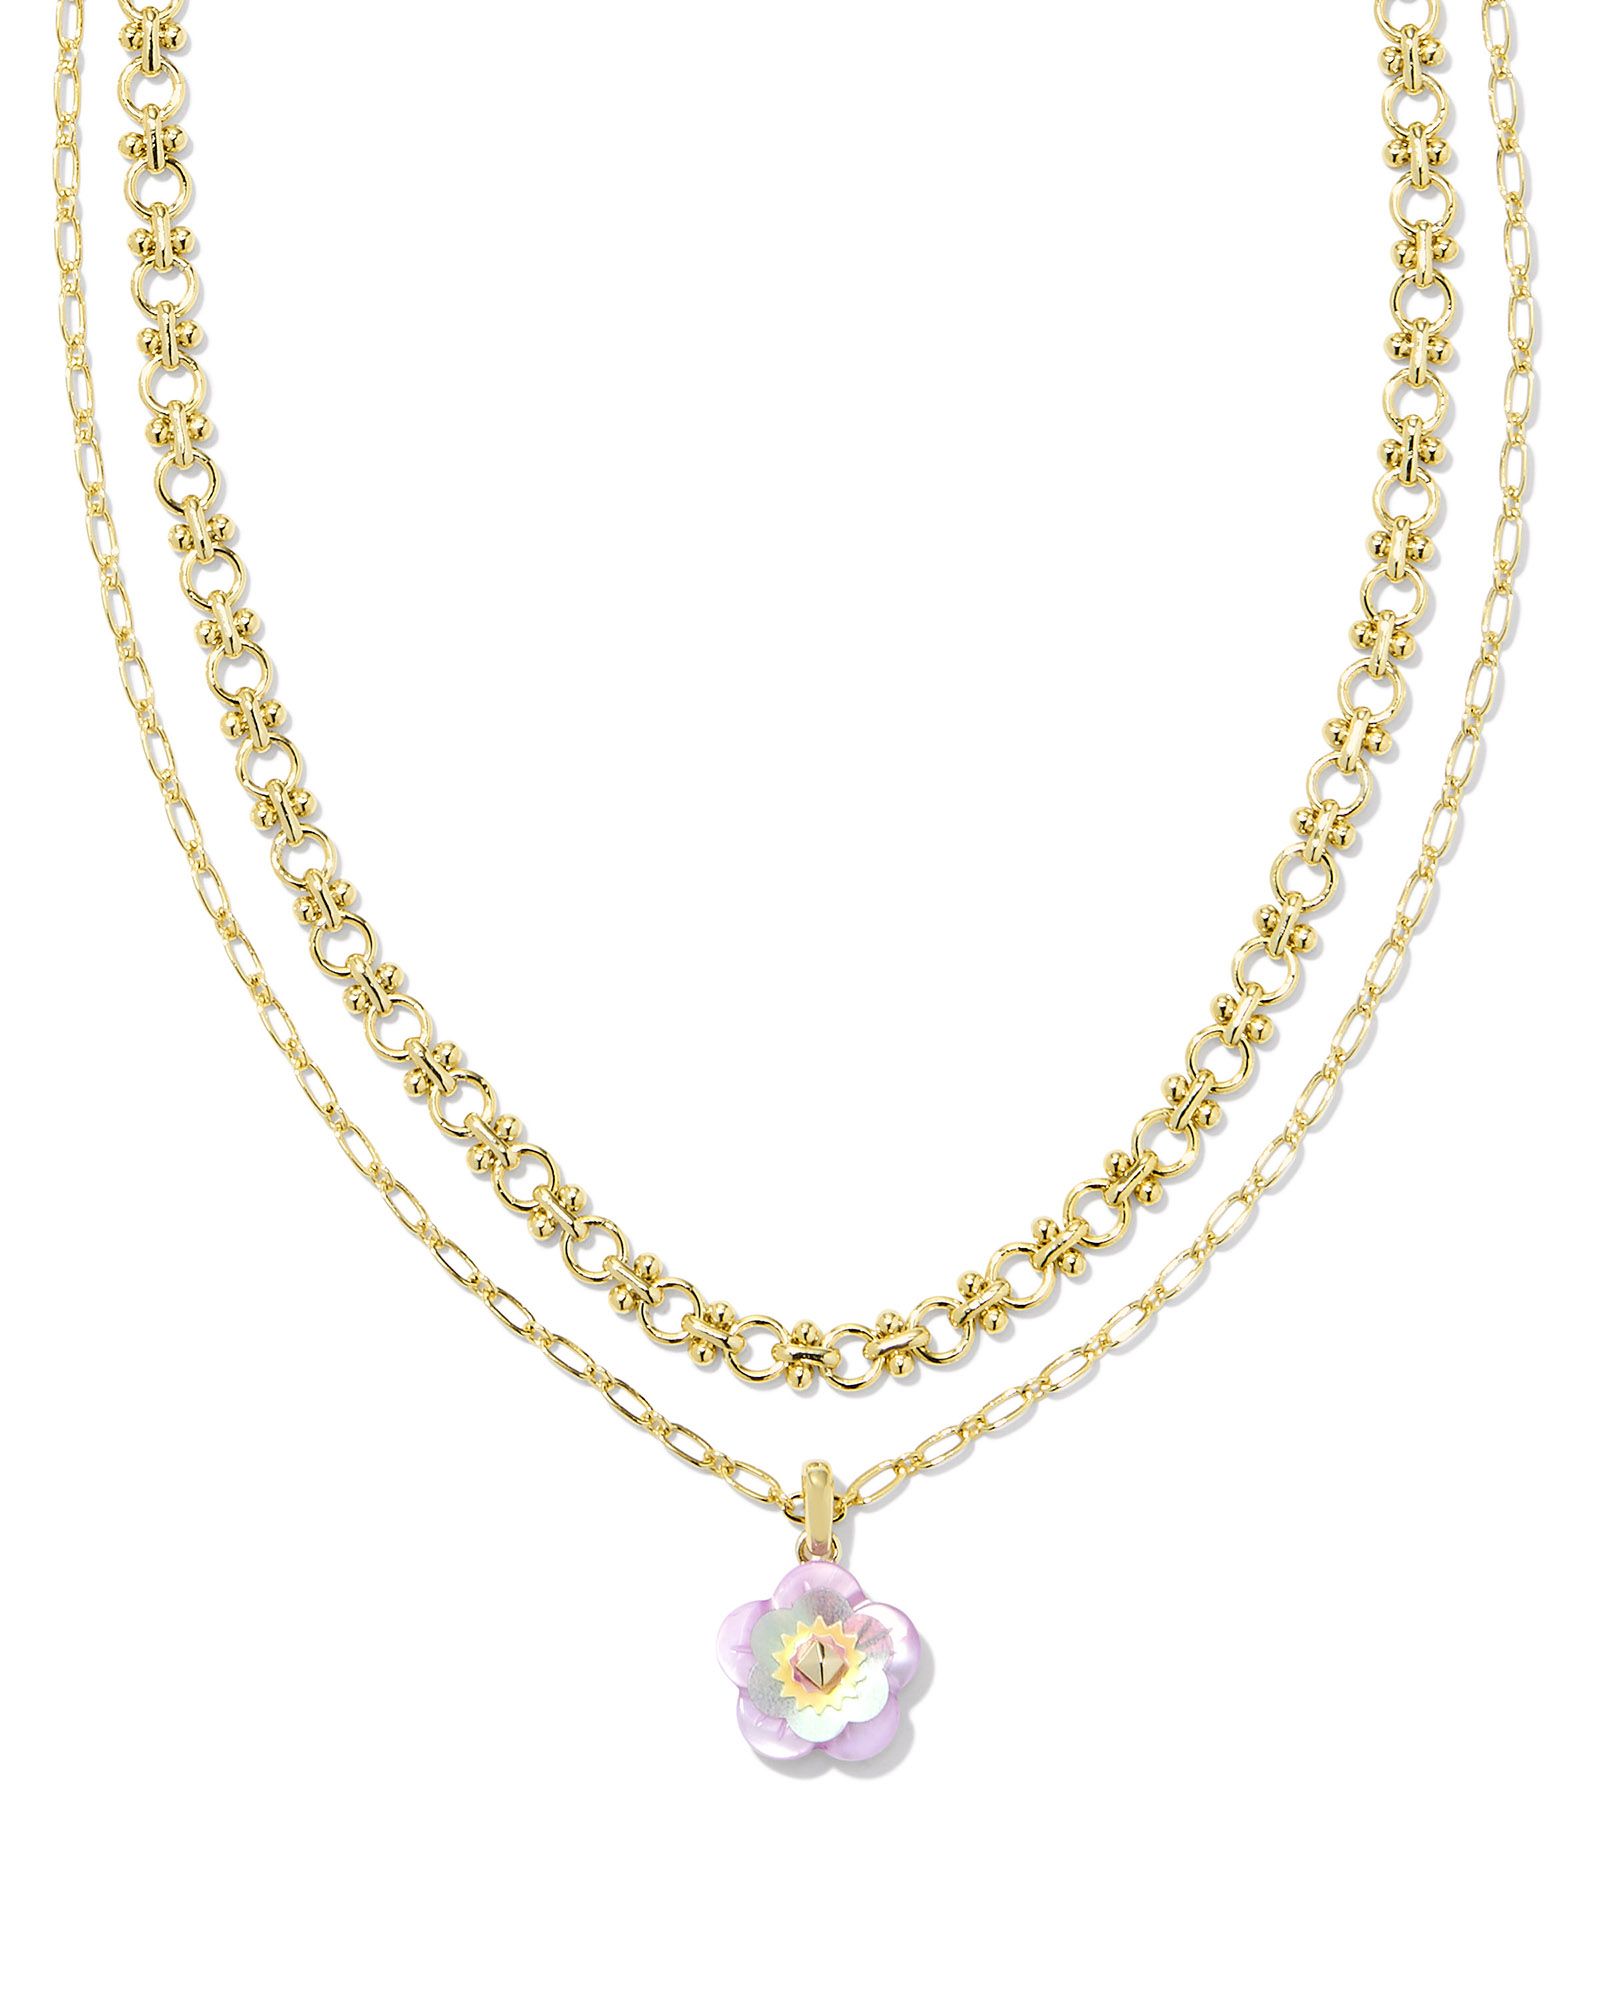 Deliah Gold Multi Strand Necklace in Pastel Mix | Kendra Scott